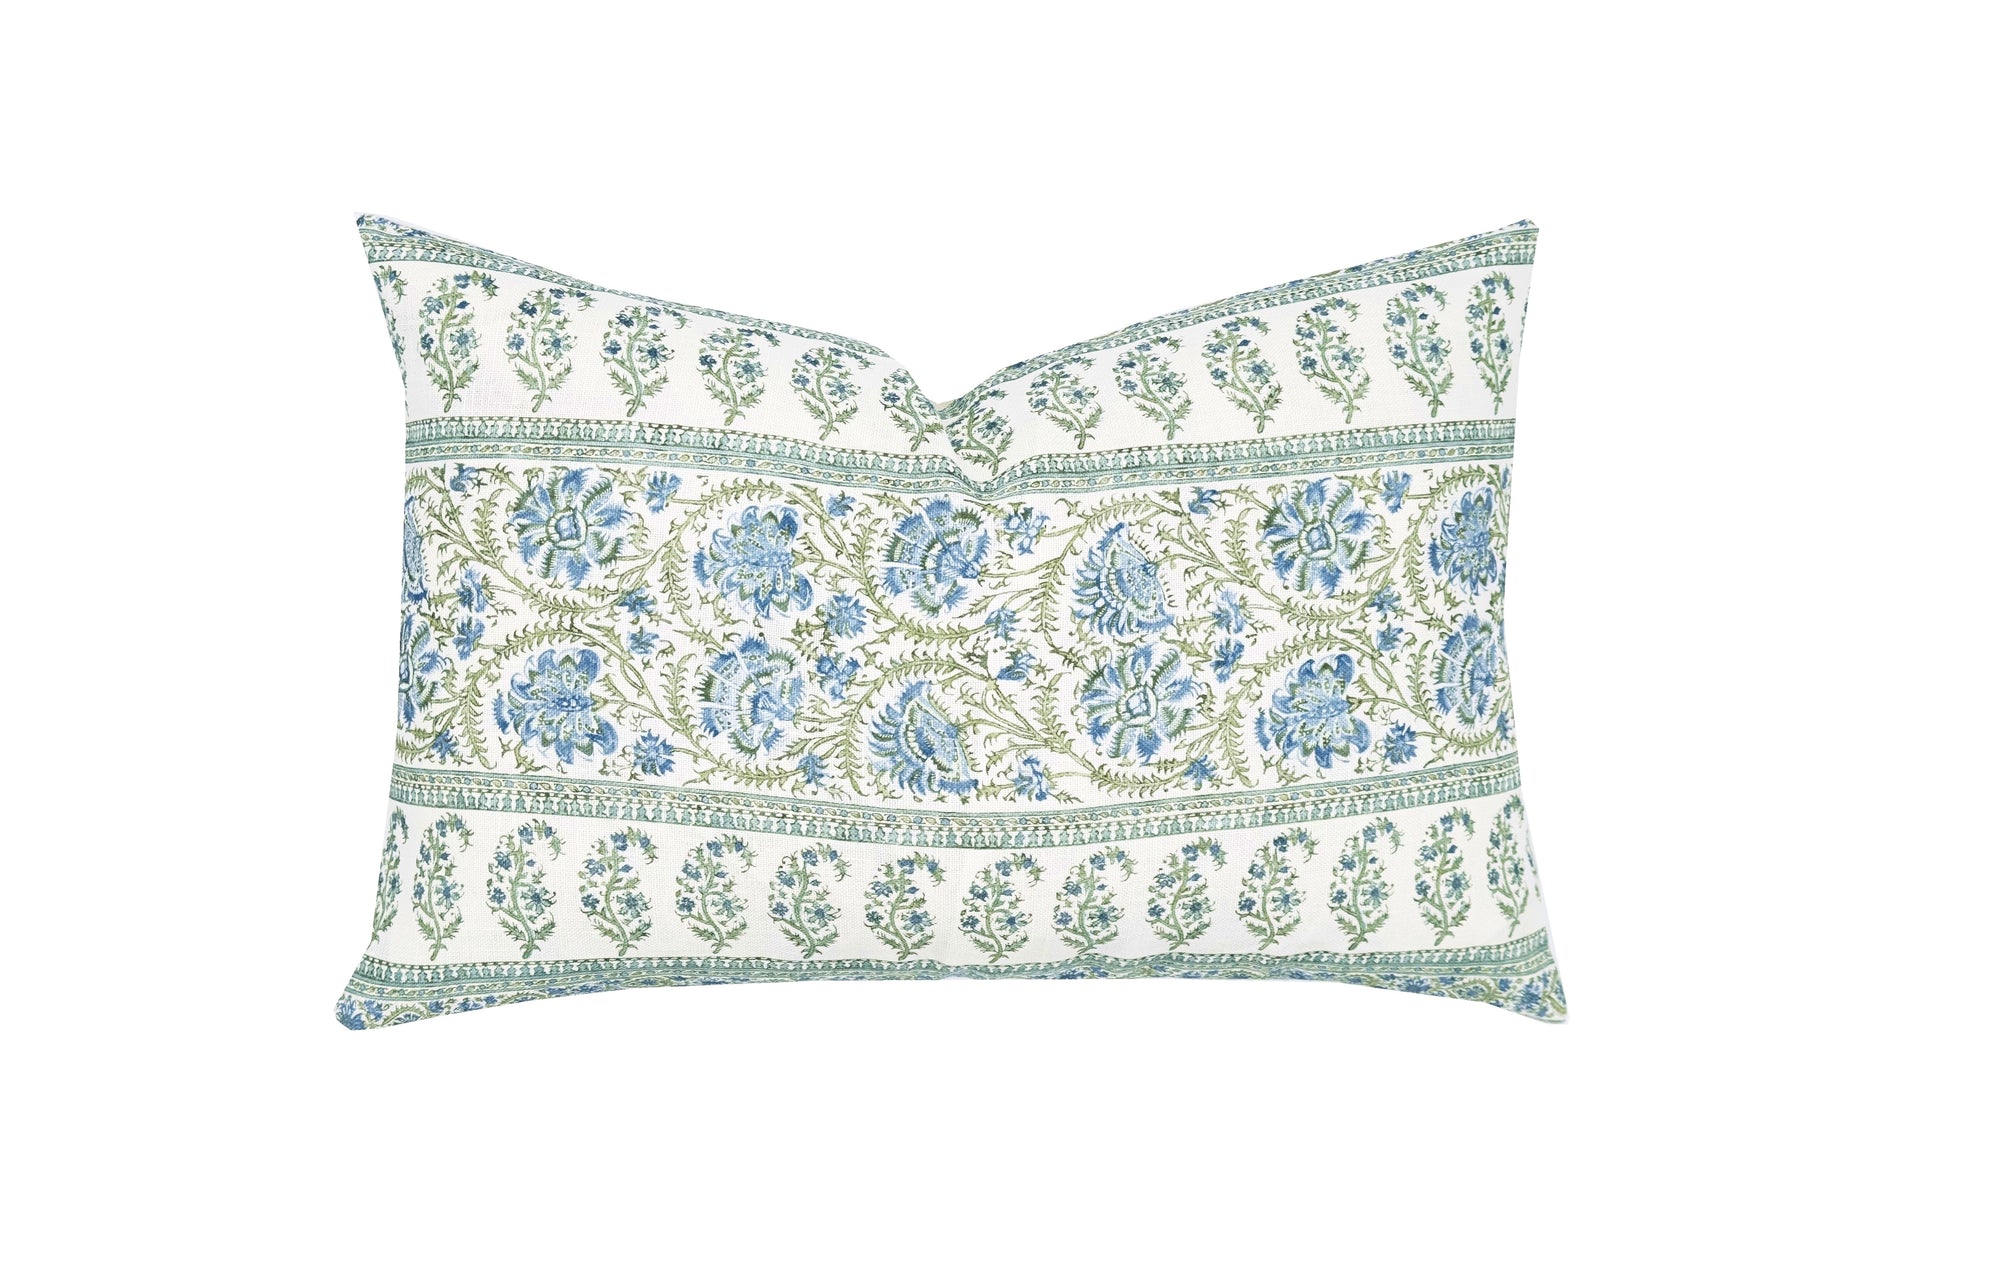 Indiennes Stripe Sea Lumbar Pillow Cover | Lee Jofa | Blue and Green